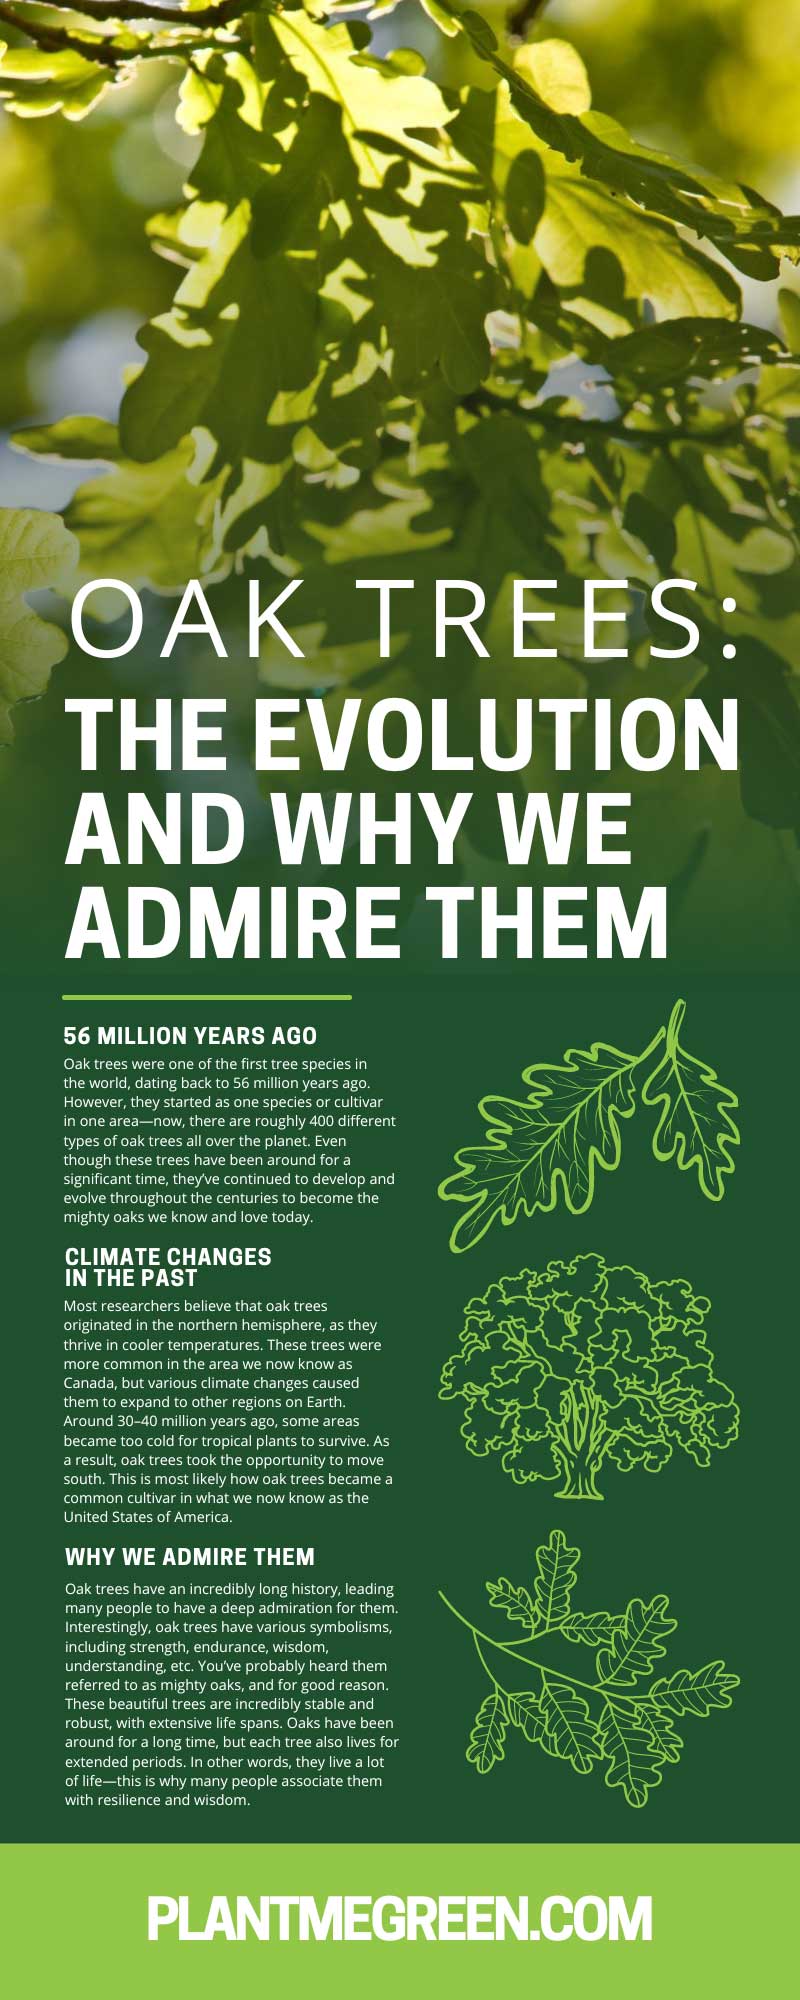 Oak Trees: The Evolution and Why We Admire Them